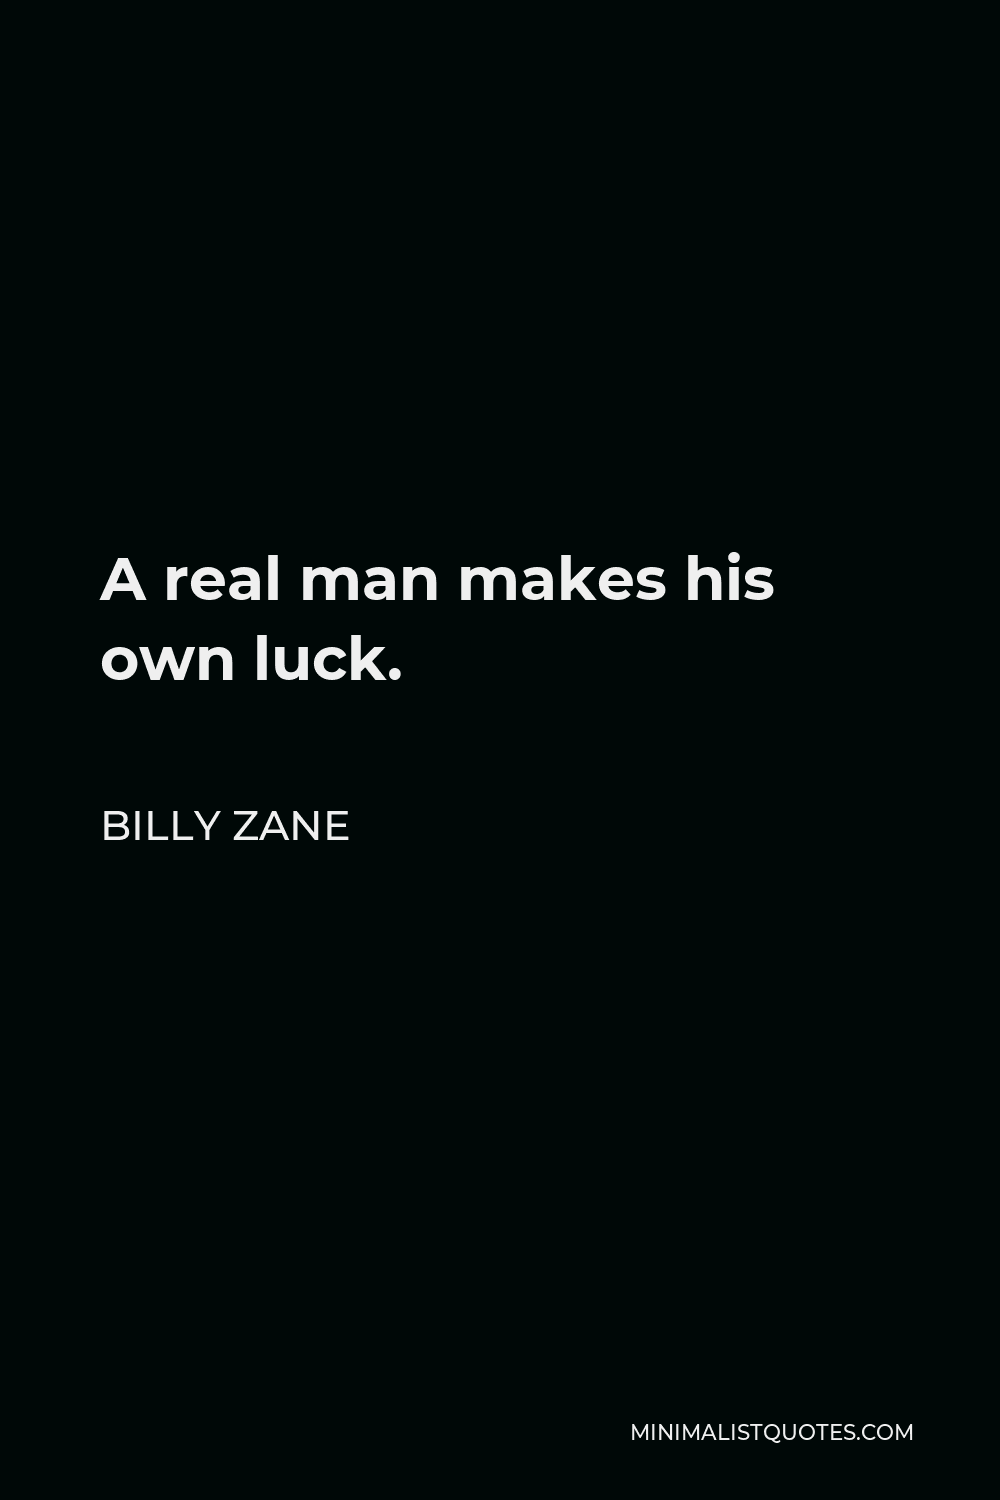 Billy Zane Quote - A real man makes his own luck.